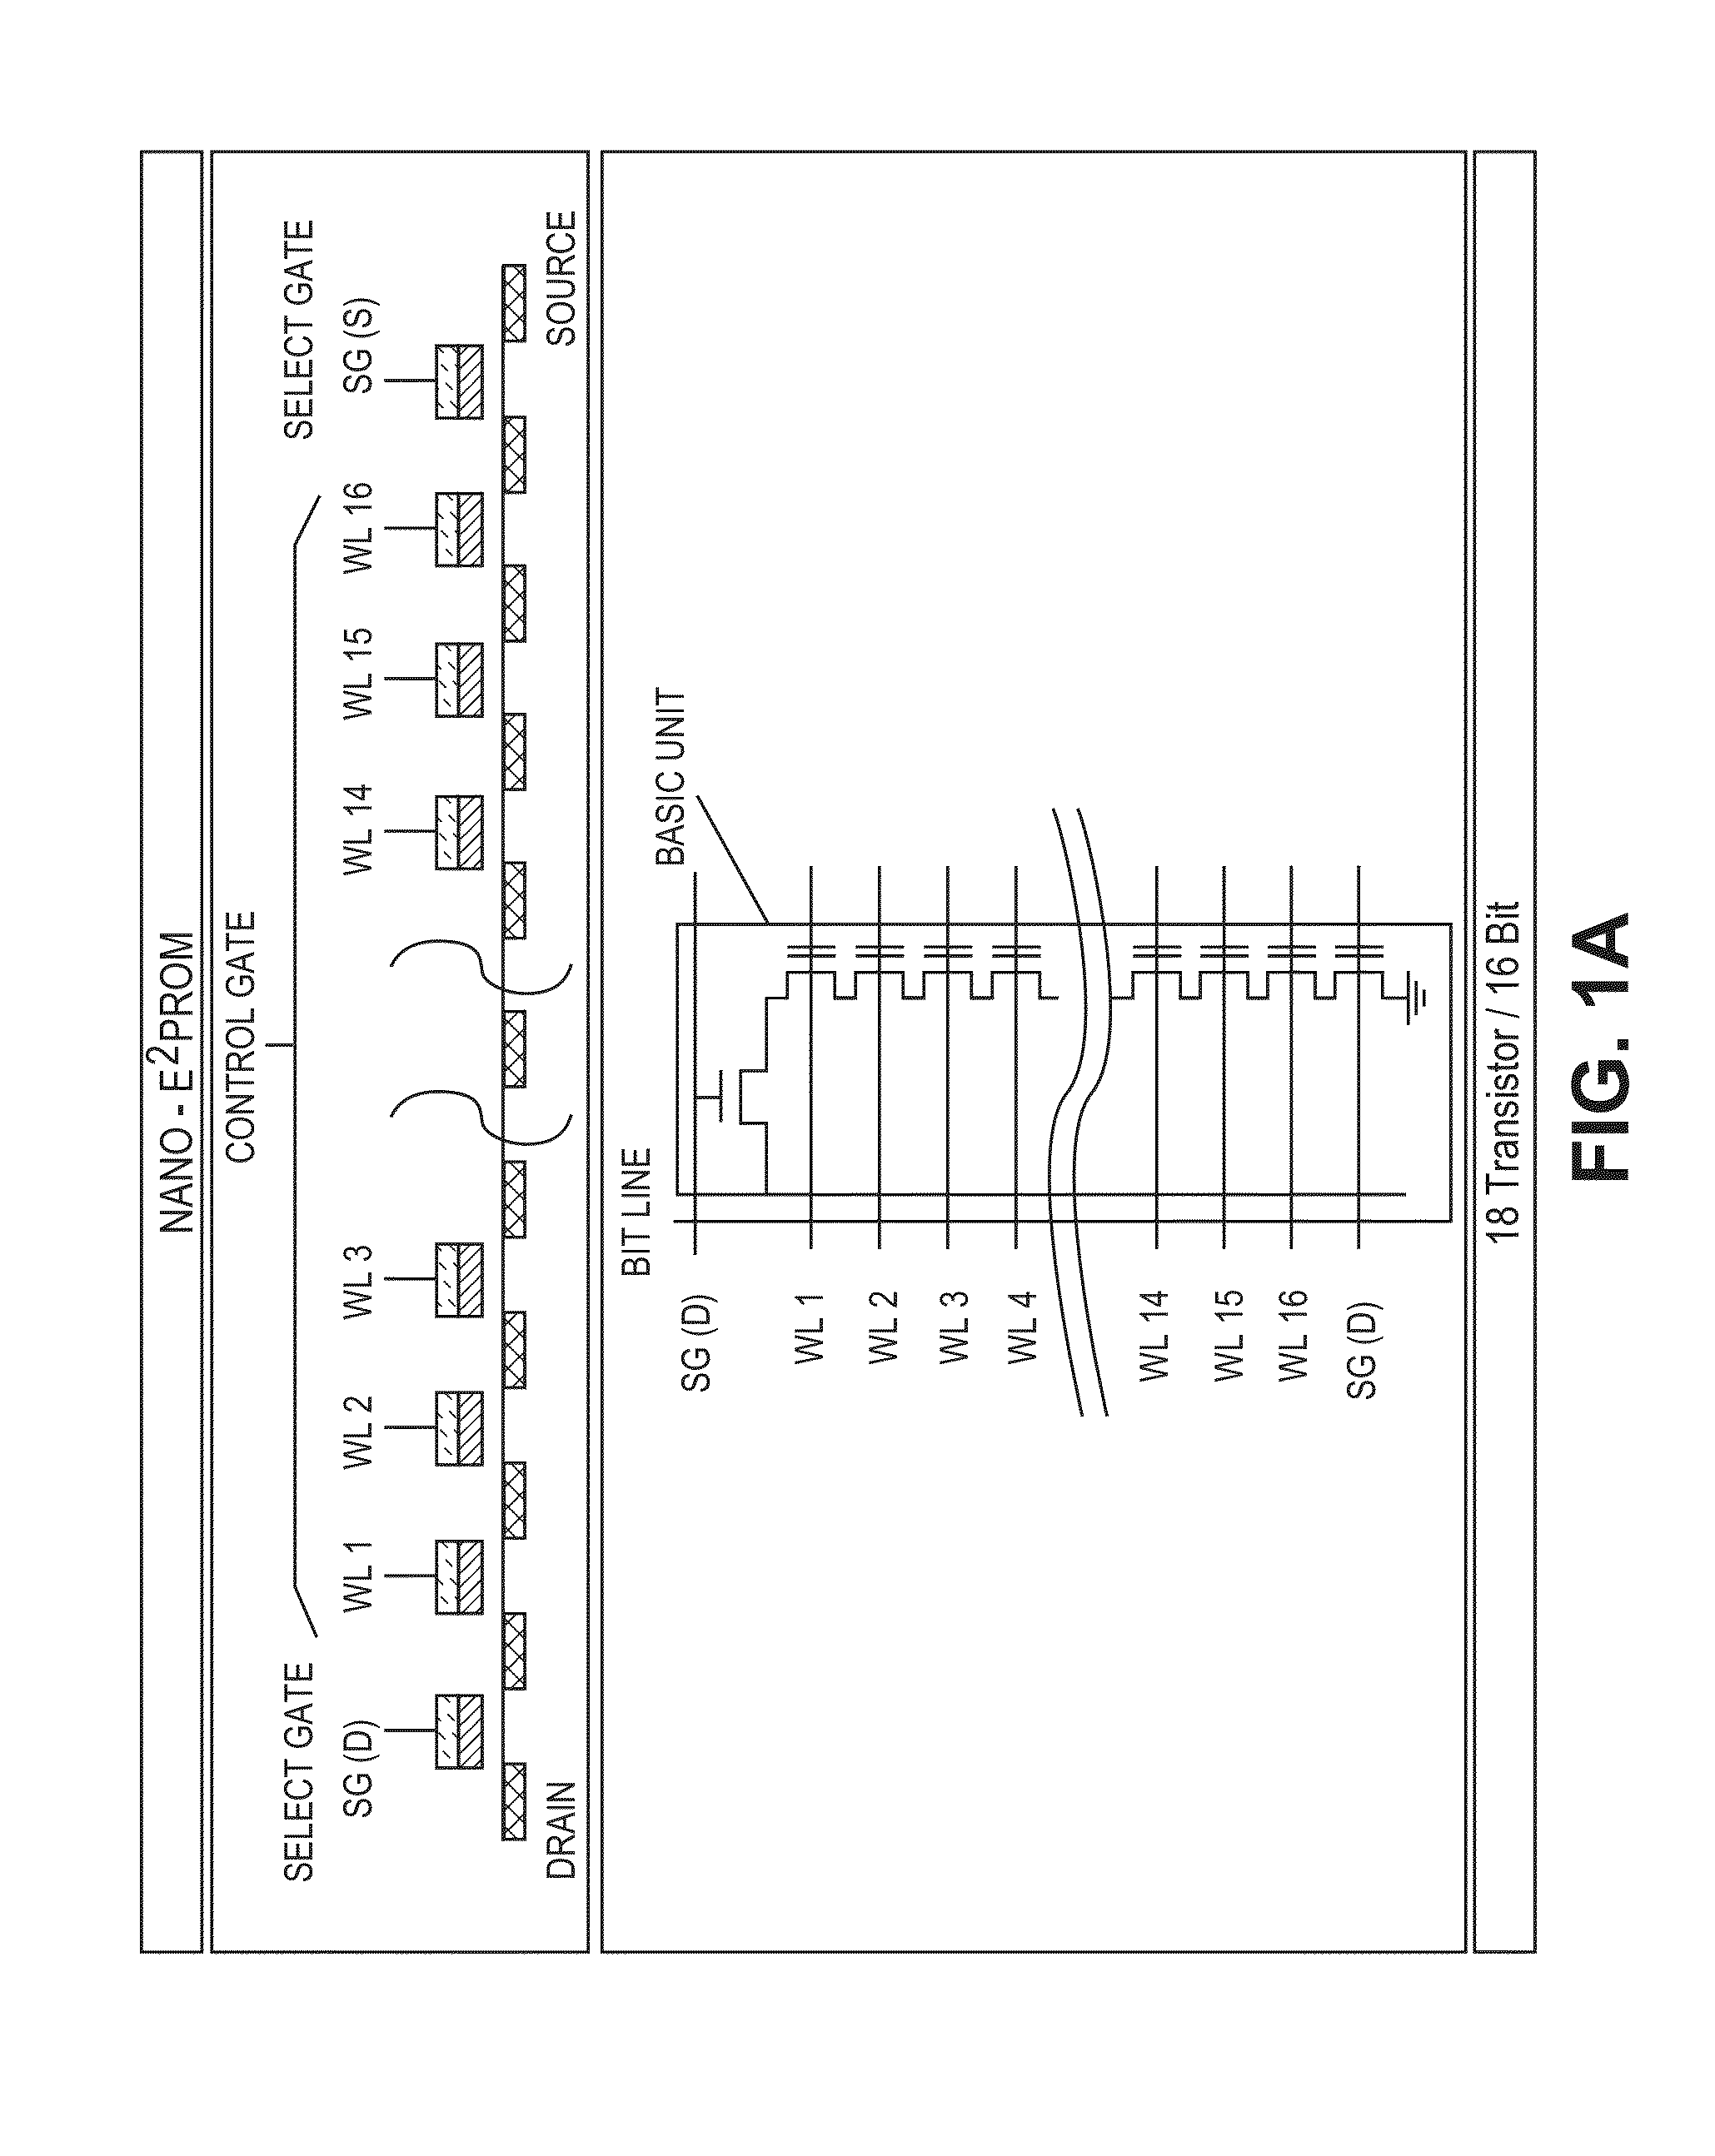 Silicon dioxide-polysilicon multi-layered stack etching with plasma etch chamber employing non-corrosive etchants